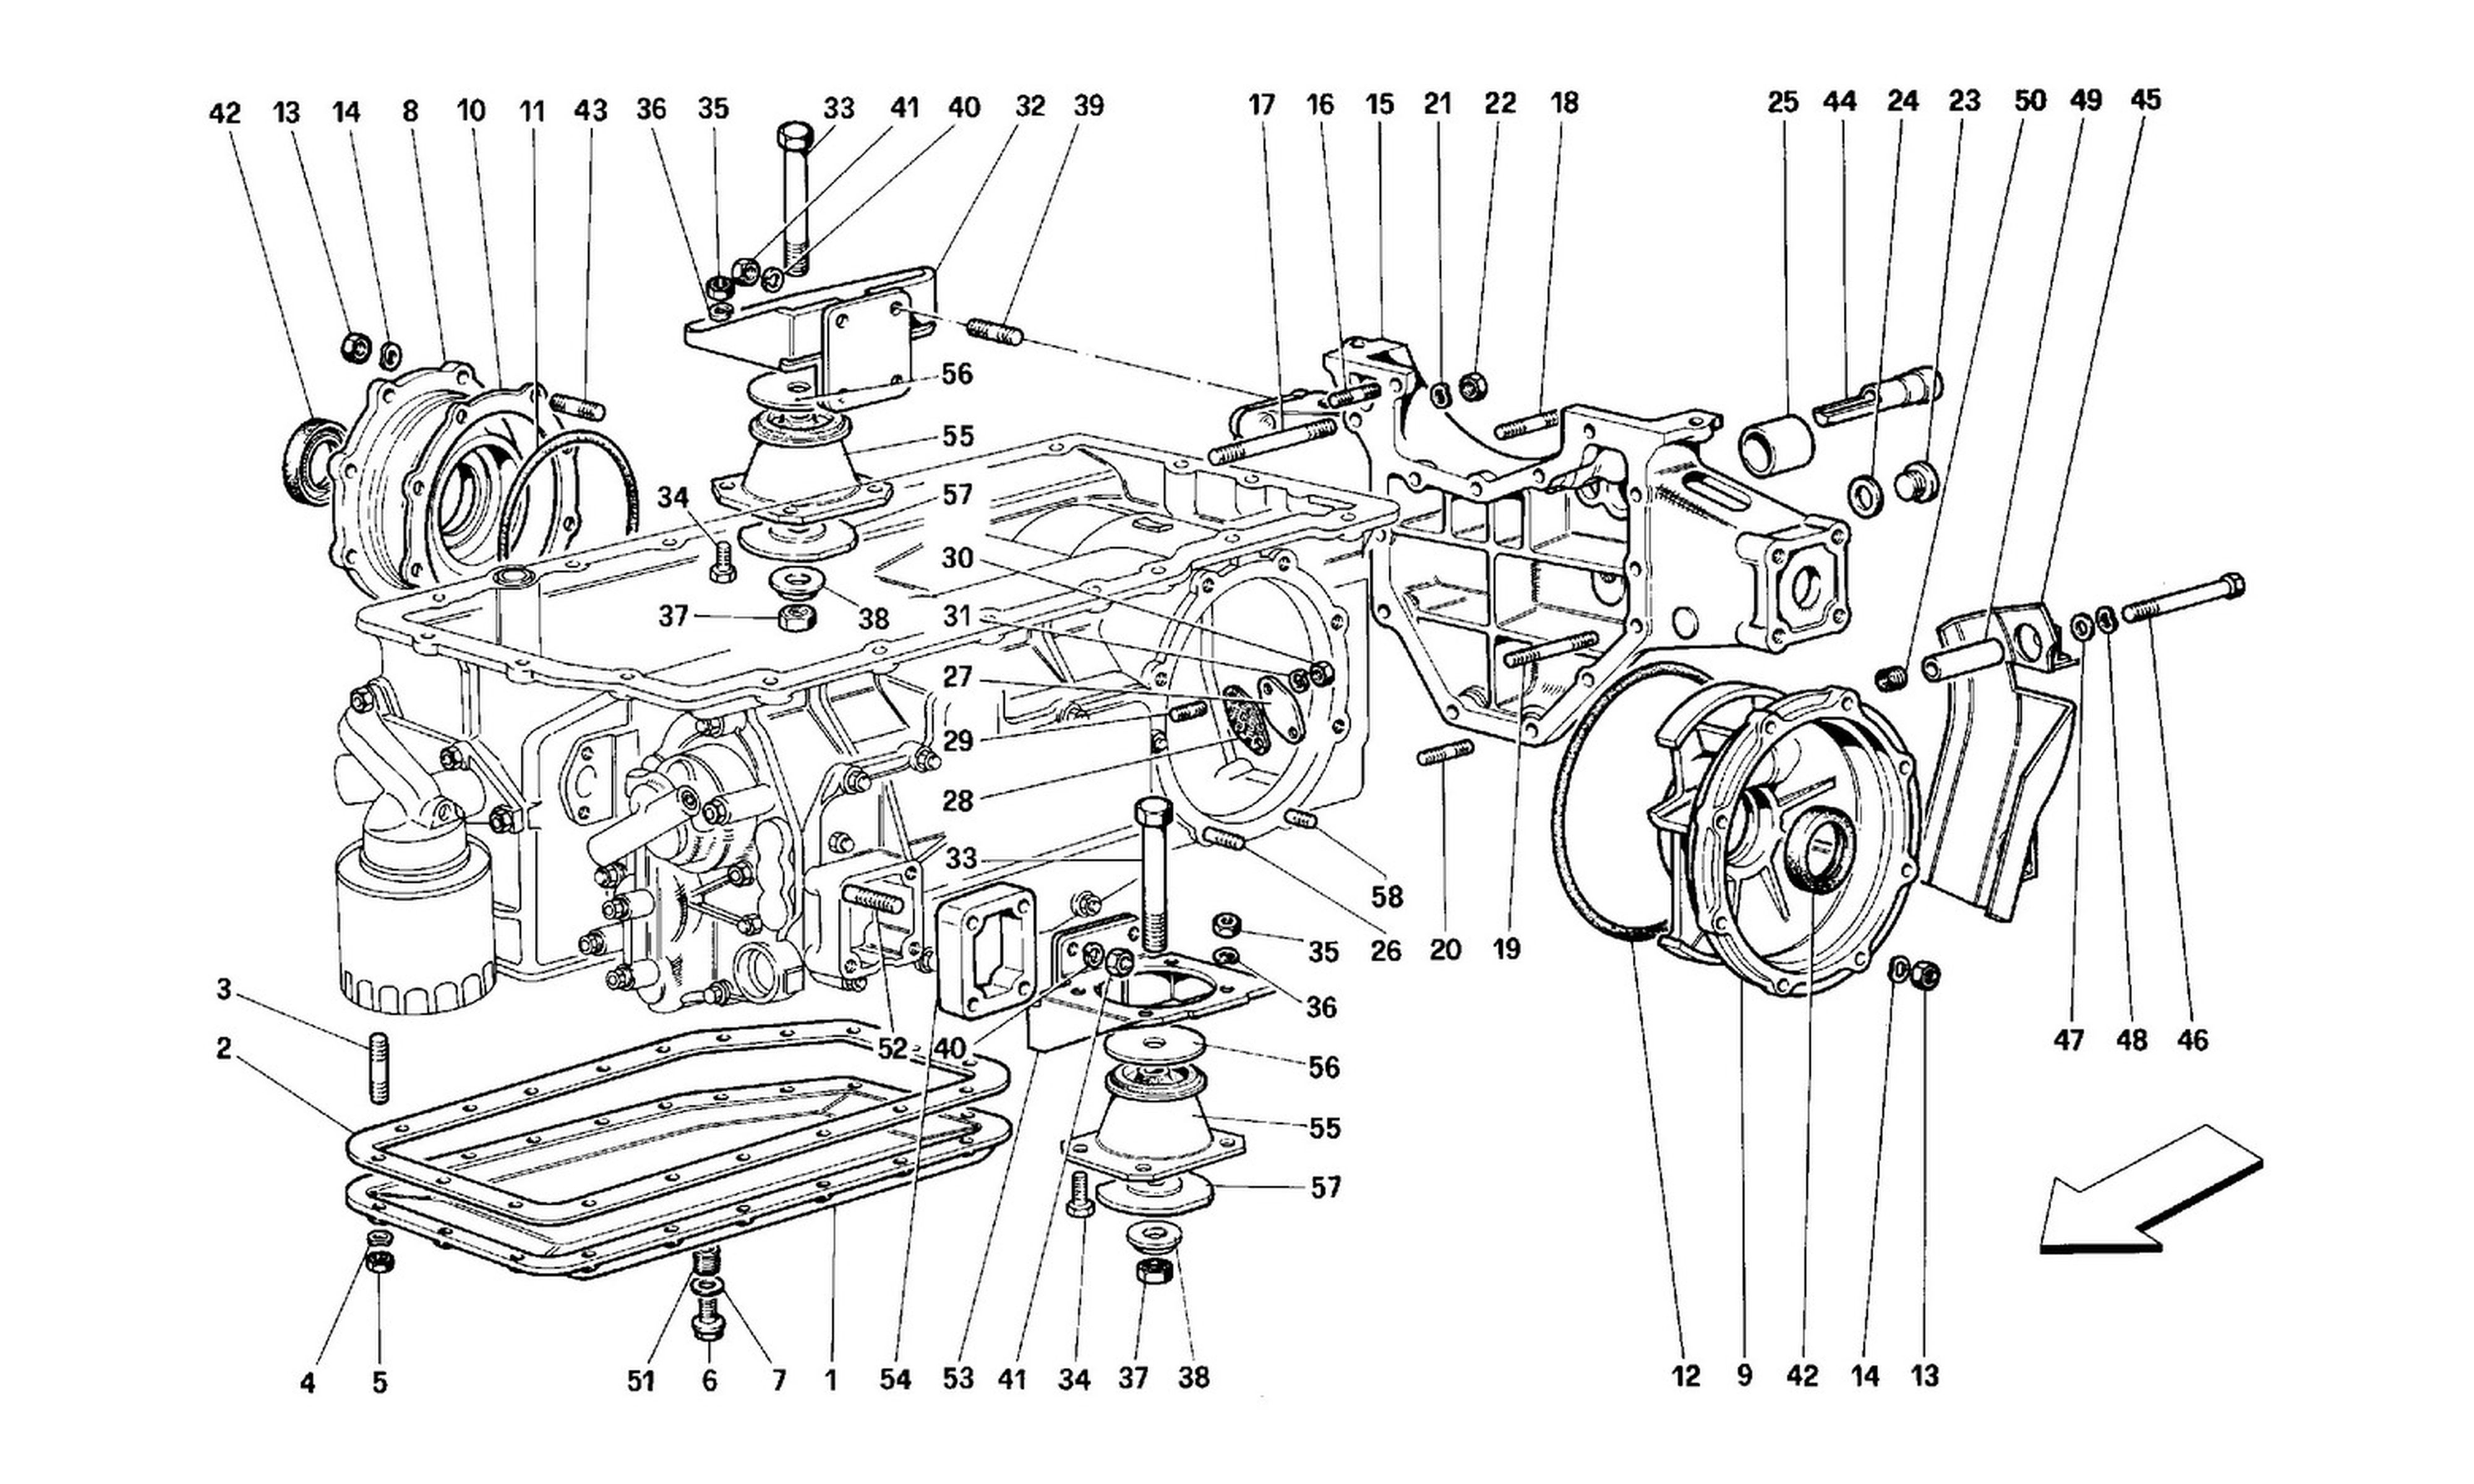 Schematic: Gearbox - Mounting And Covers